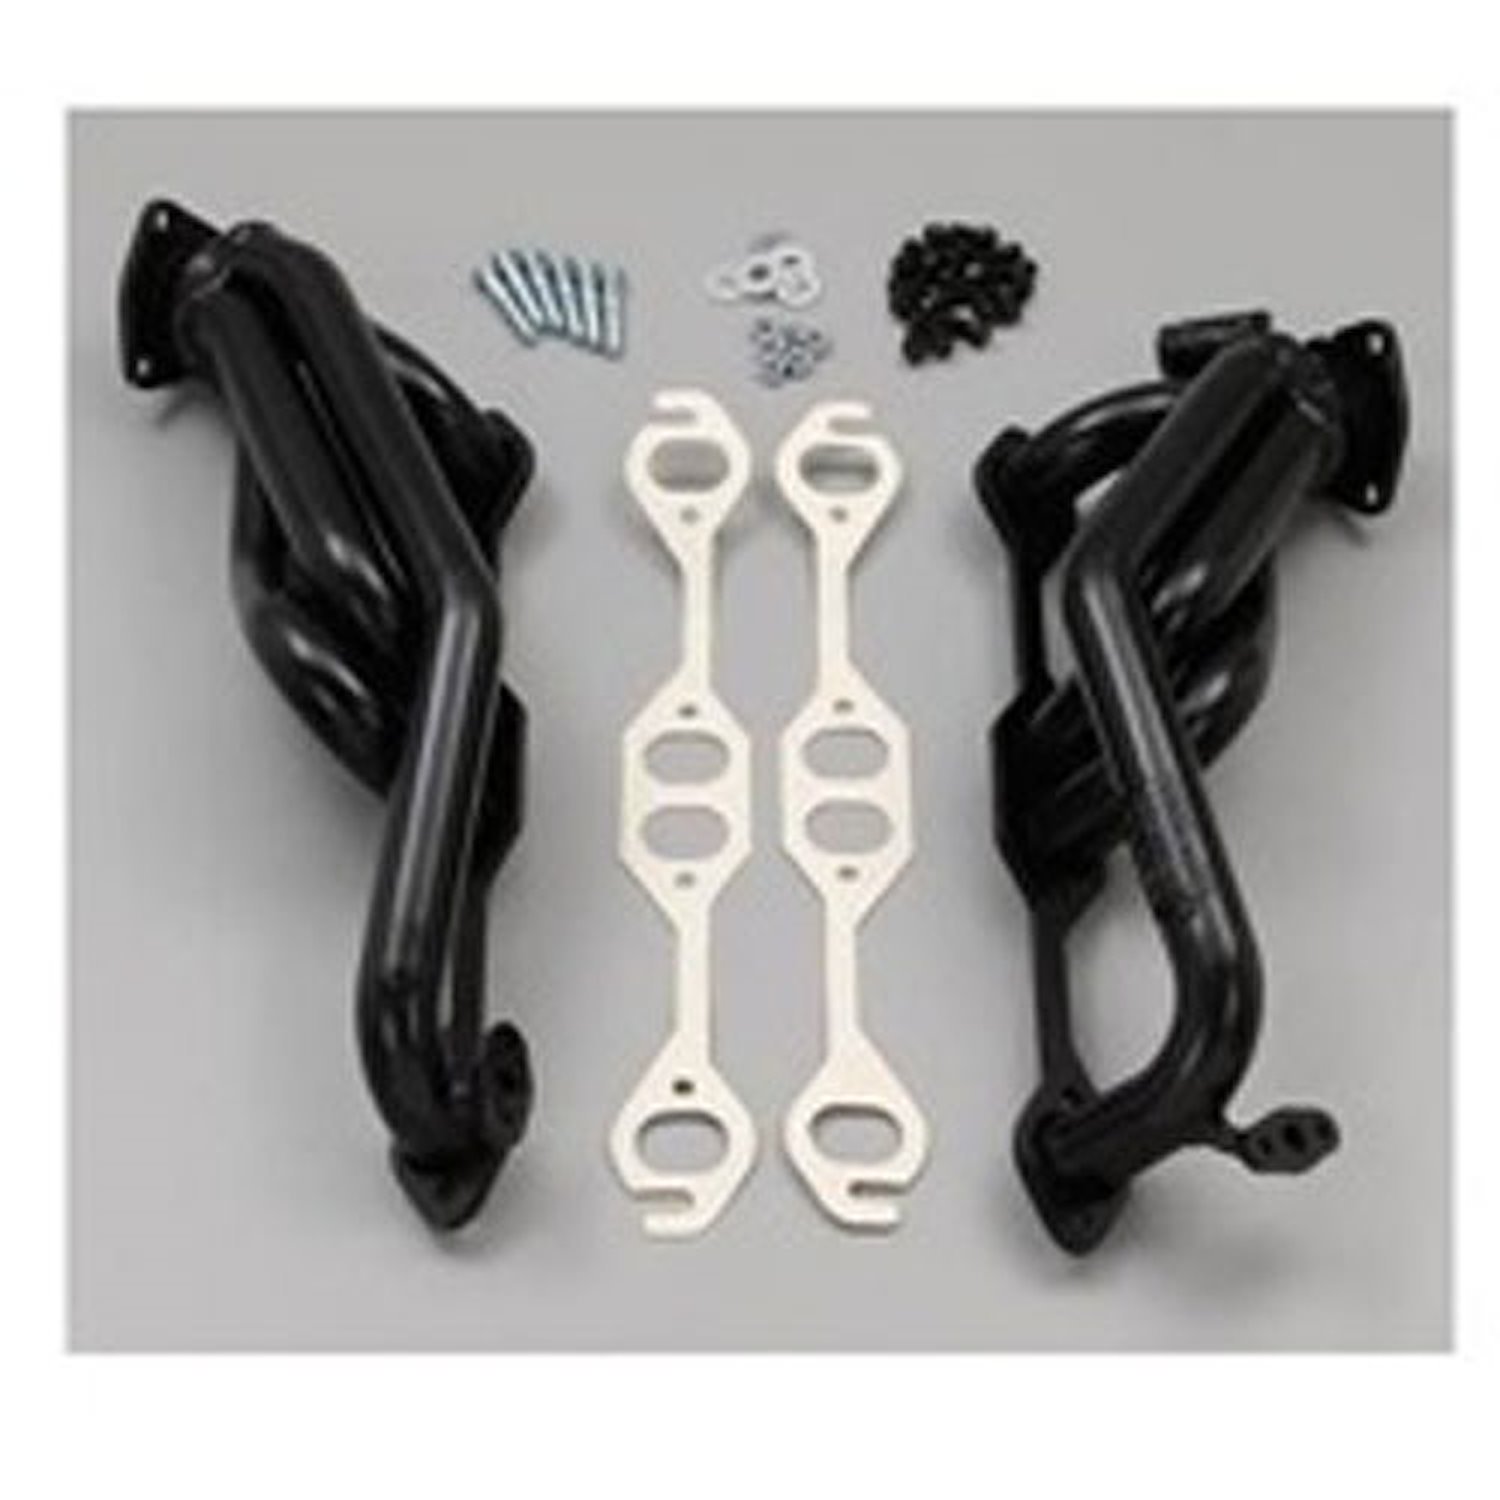 Standard Duty Uncoated Shorty Headers for 1996-2000